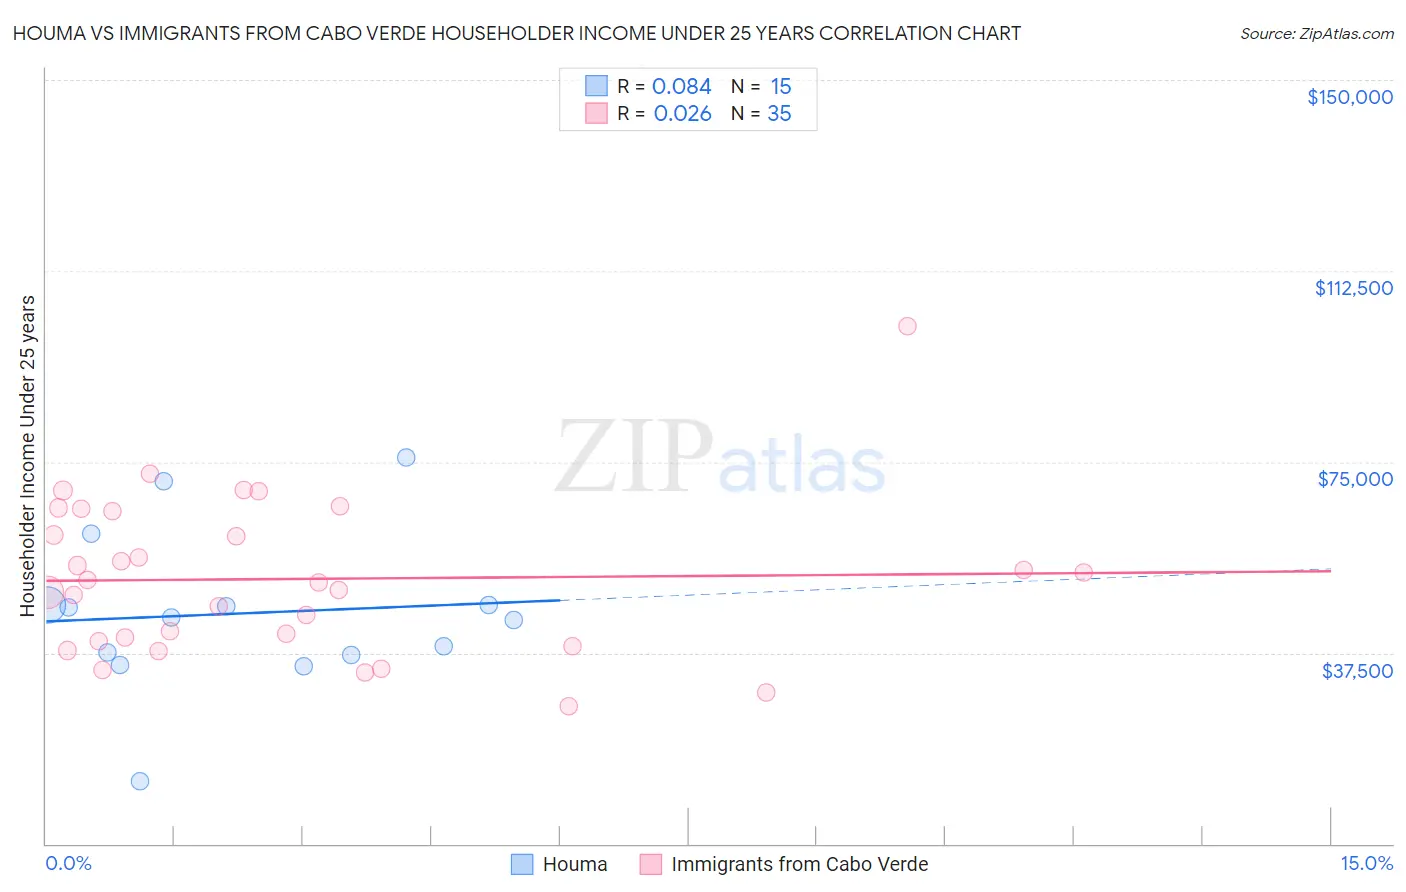 Houma vs Immigrants from Cabo Verde Householder Income Under 25 years